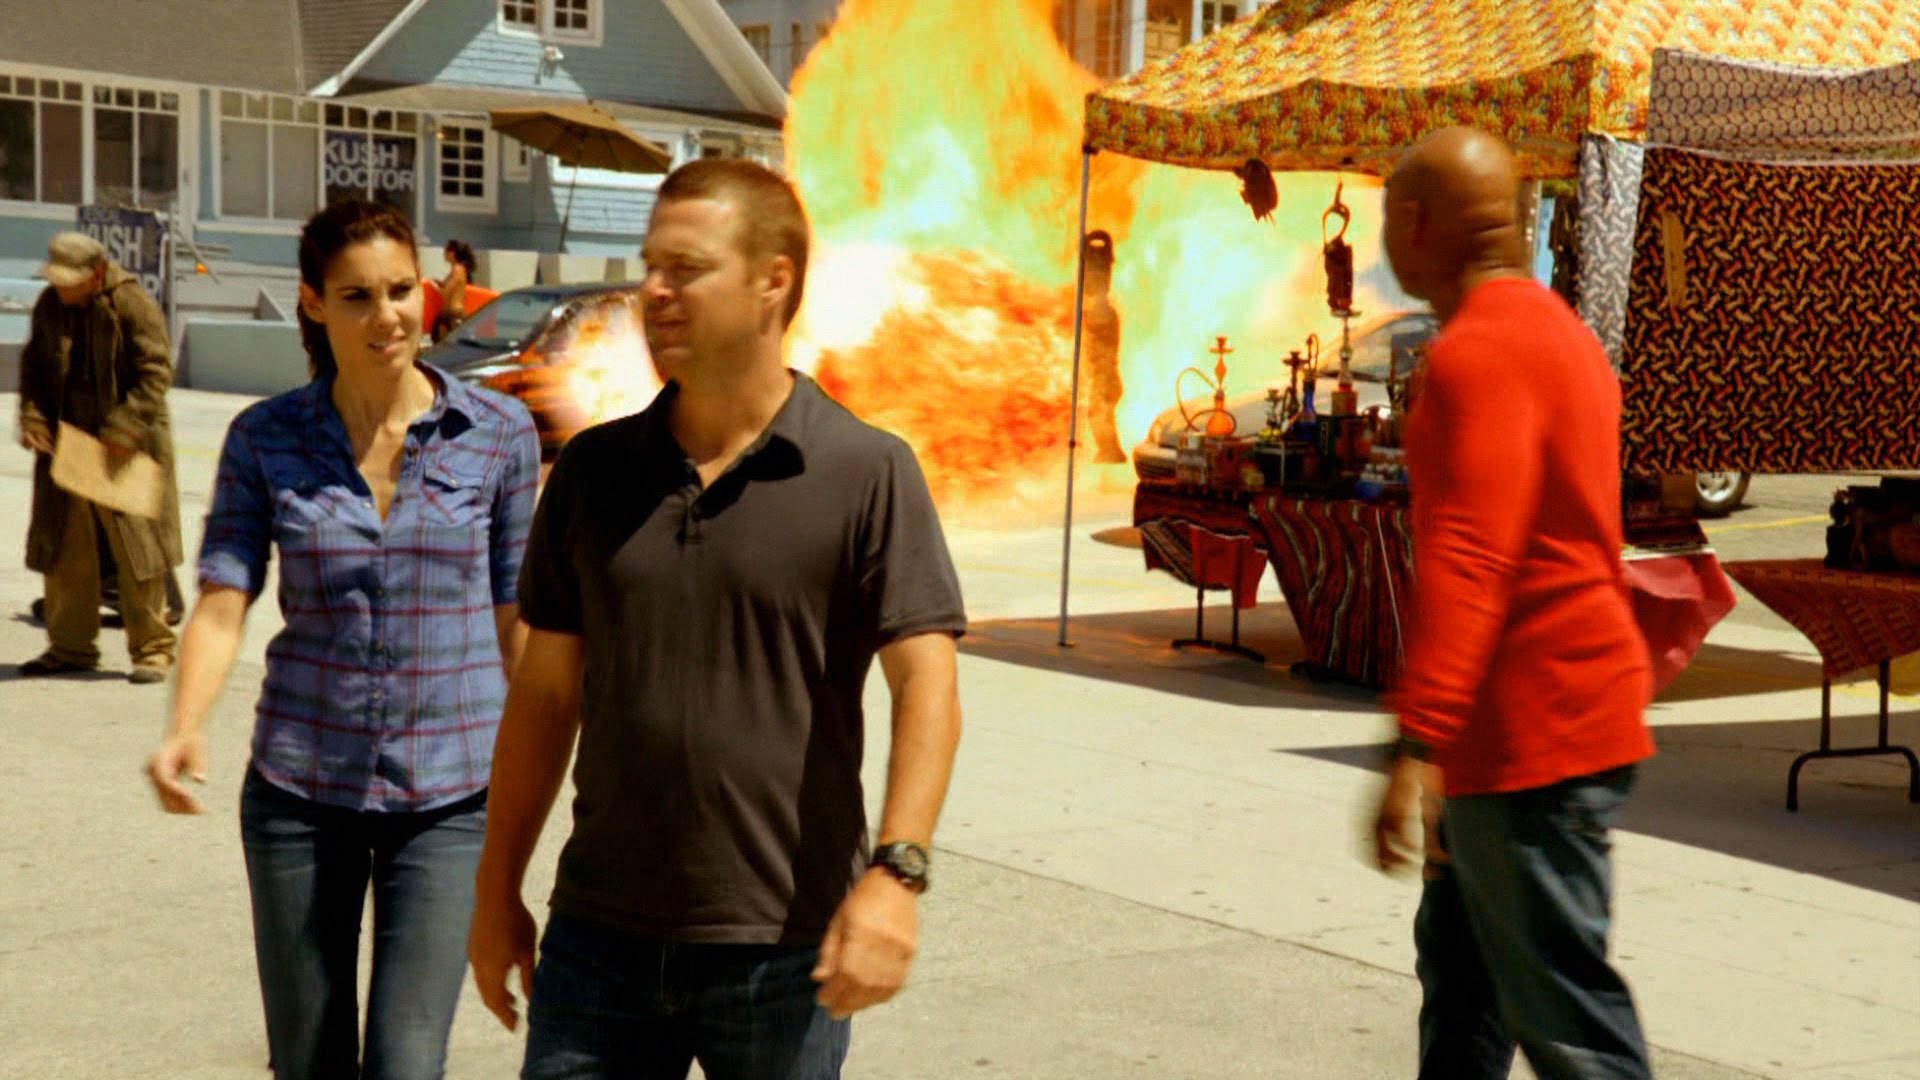 NCIS: Los Angeles on Esquire Network - YouTube